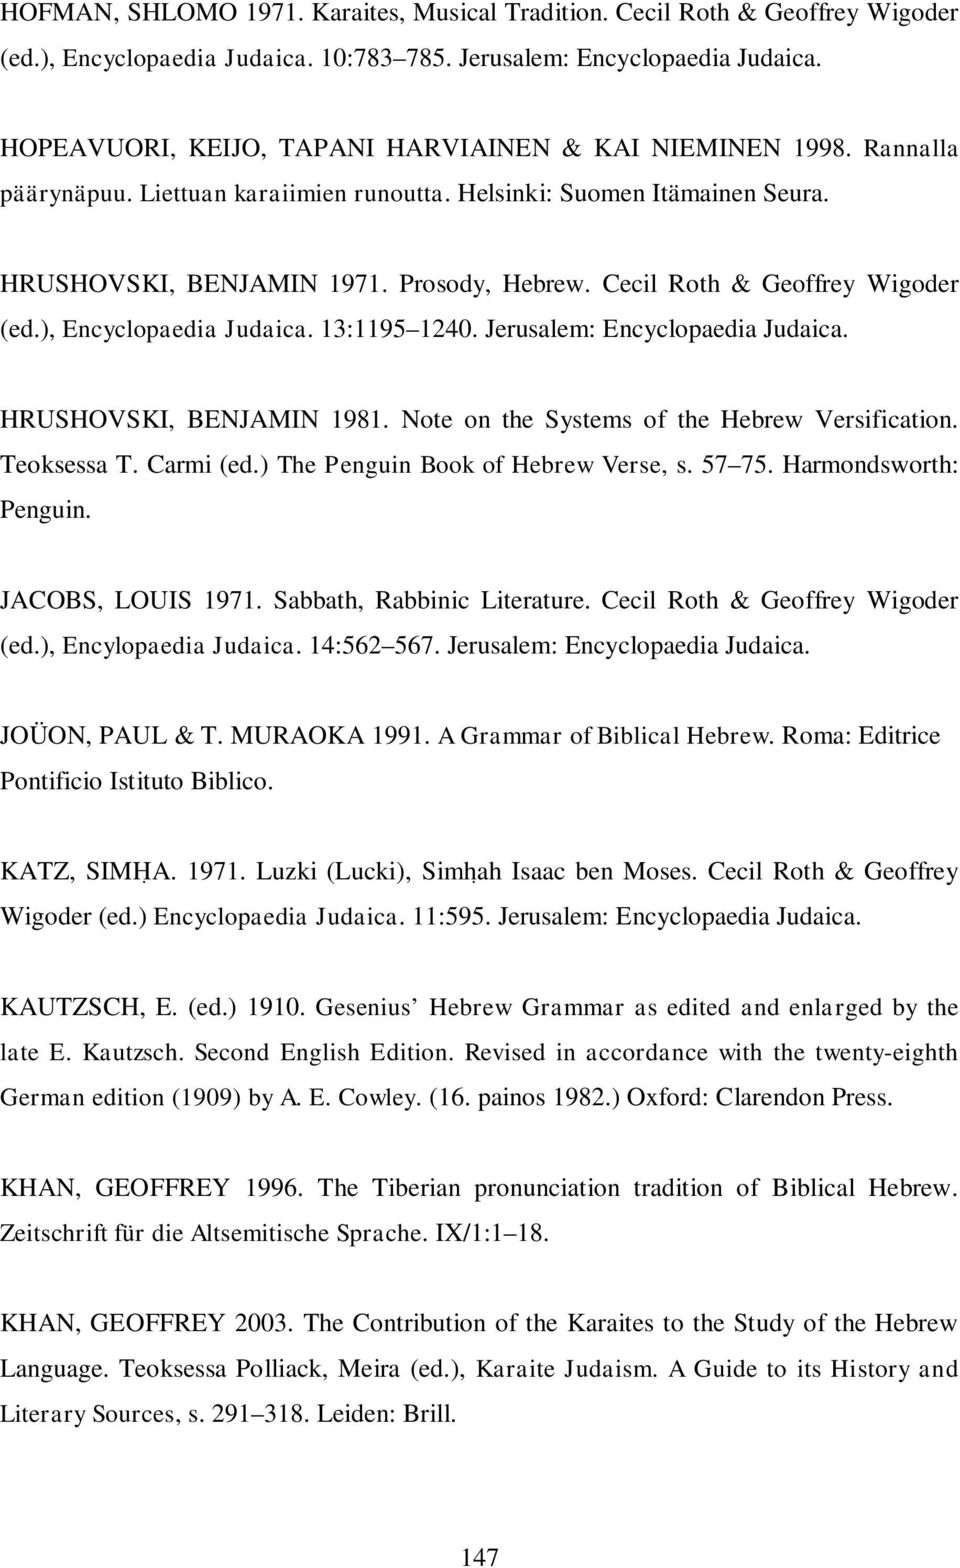 Cecil Roth & Geoffrey Wigoder (ed.), Encyclopaedia Judaica. 13:1195 1240. Jerusalem: Encyclopaedia Judaica. HRUSHOVSKI, BENJAMIN 1981. Note on the Systems of the Hebrew Versification. Teoksessa T.